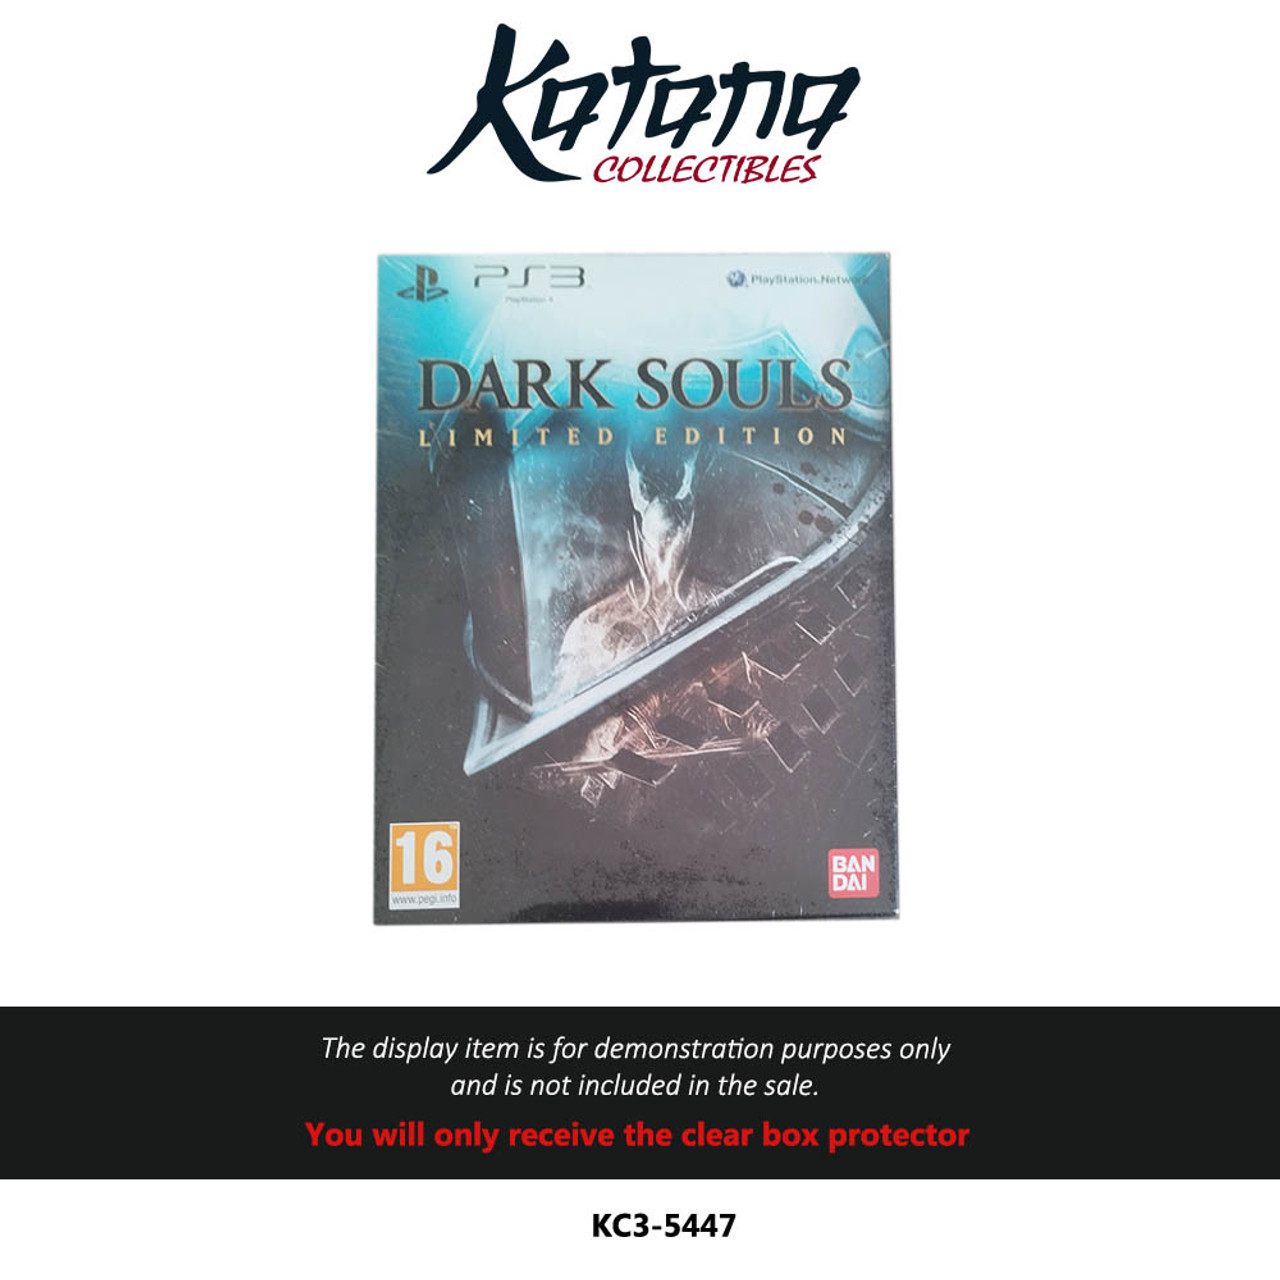 Katana Collectibles Protector For Dark Souls Limited Edition For Playstation 3